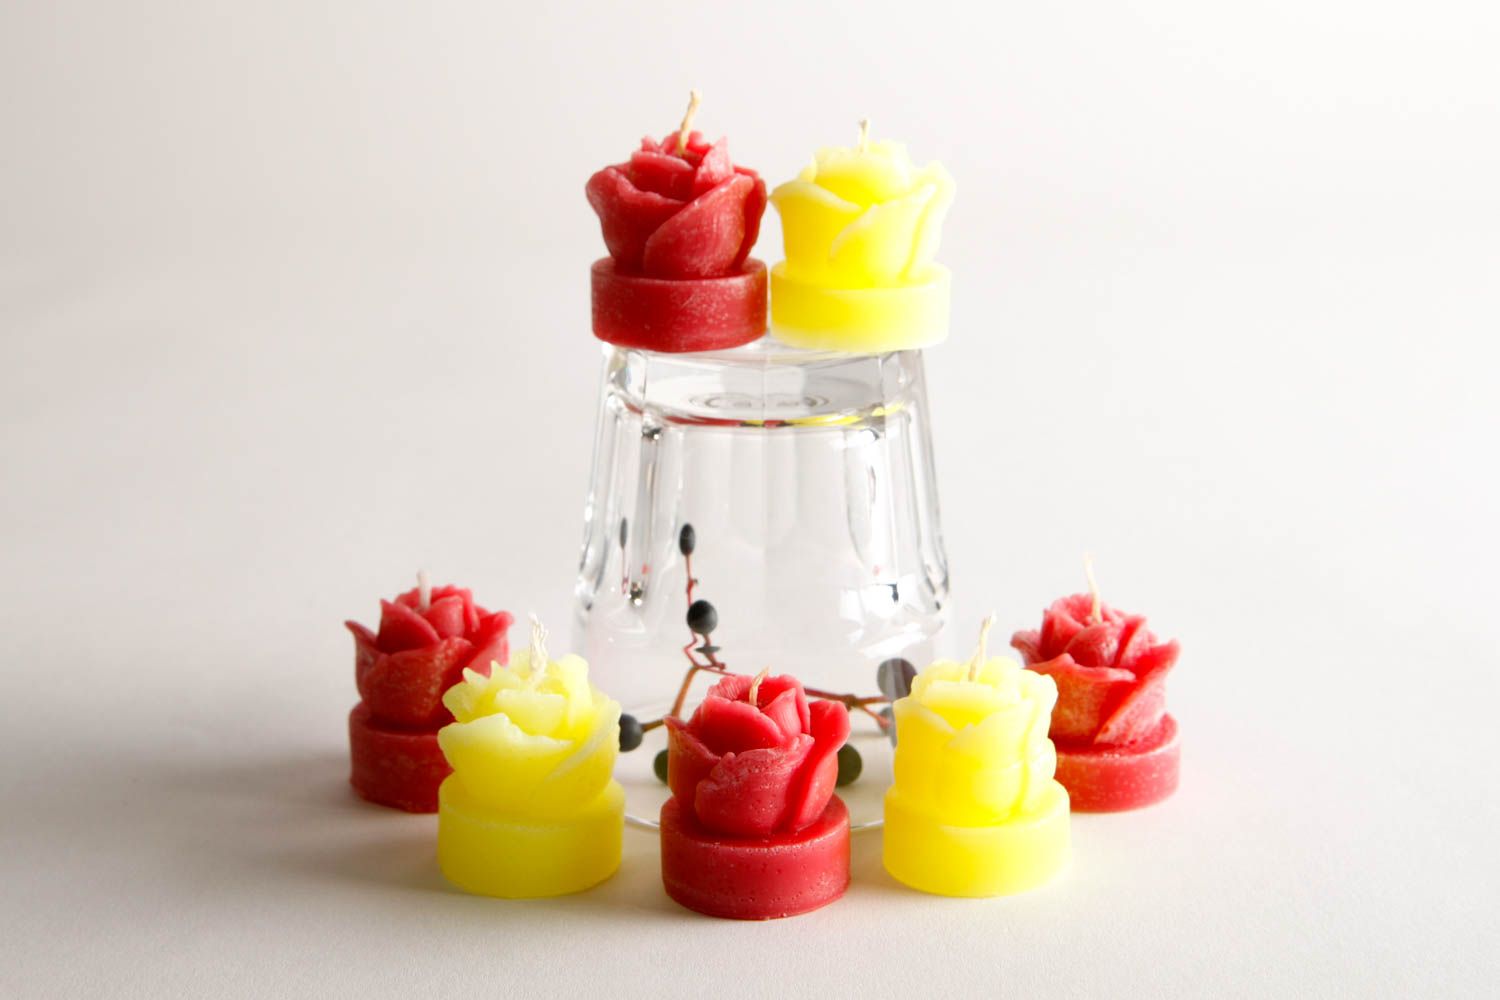 Handmade unusual candles 7 designer home accessories decorative lovely candles photo 1